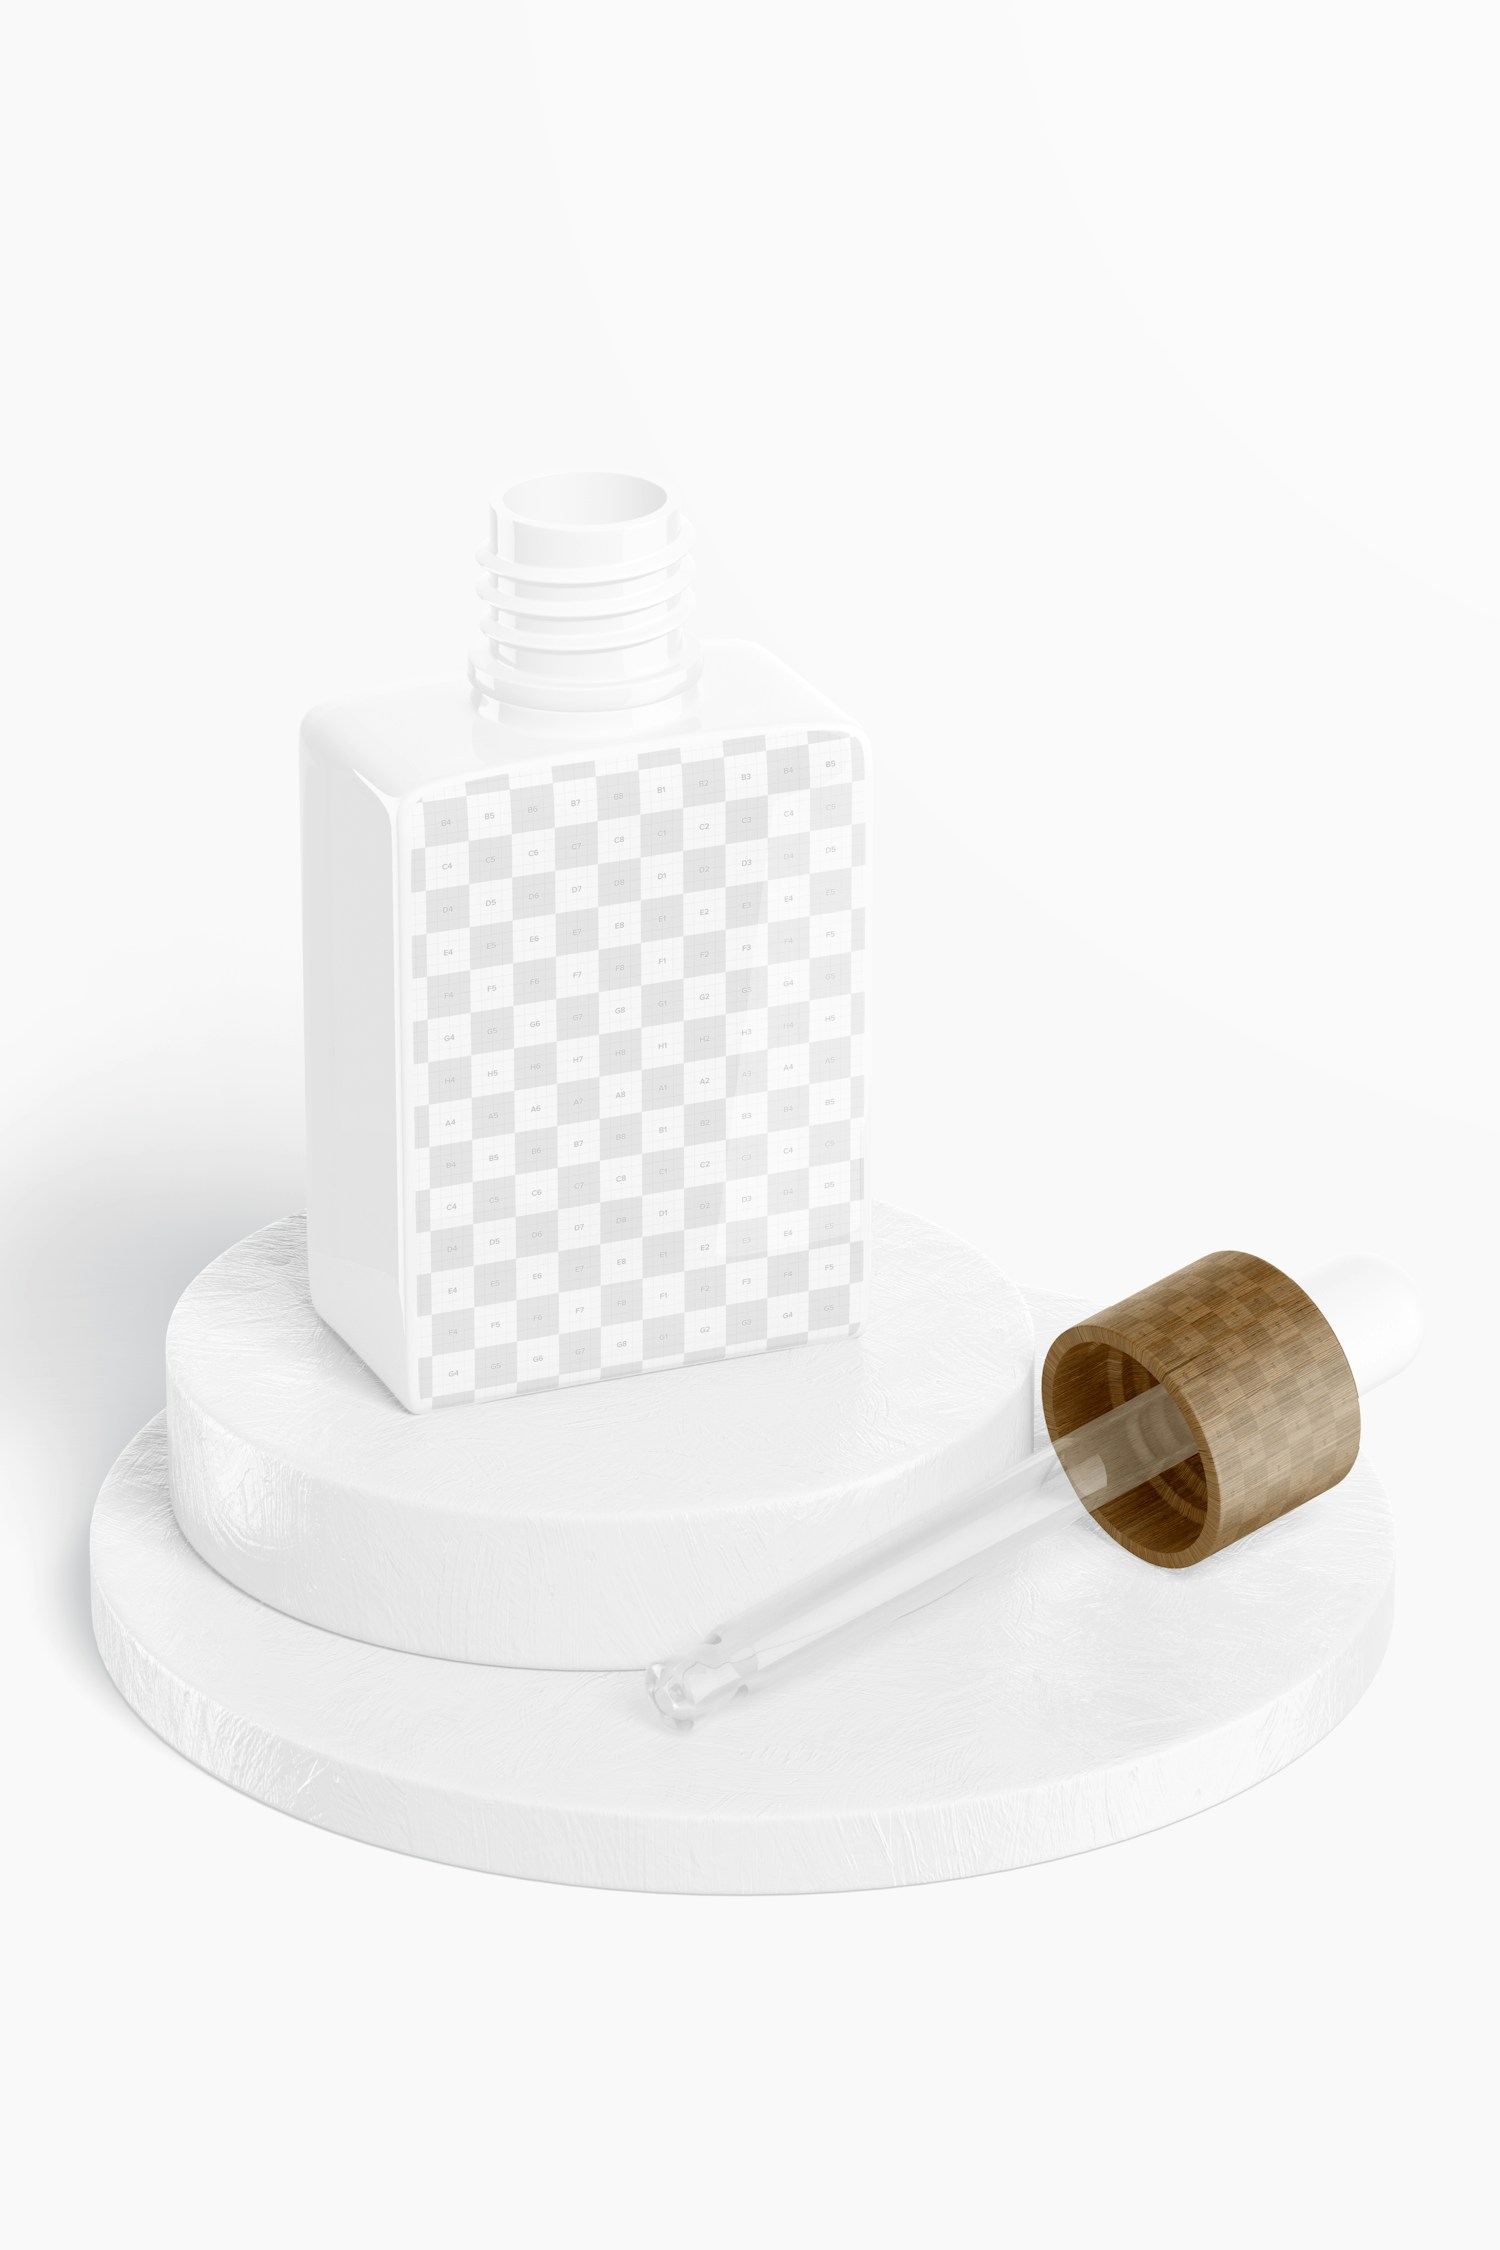 1.76 Oz Square Glass Bottle with Dropper Mockup, Perspective